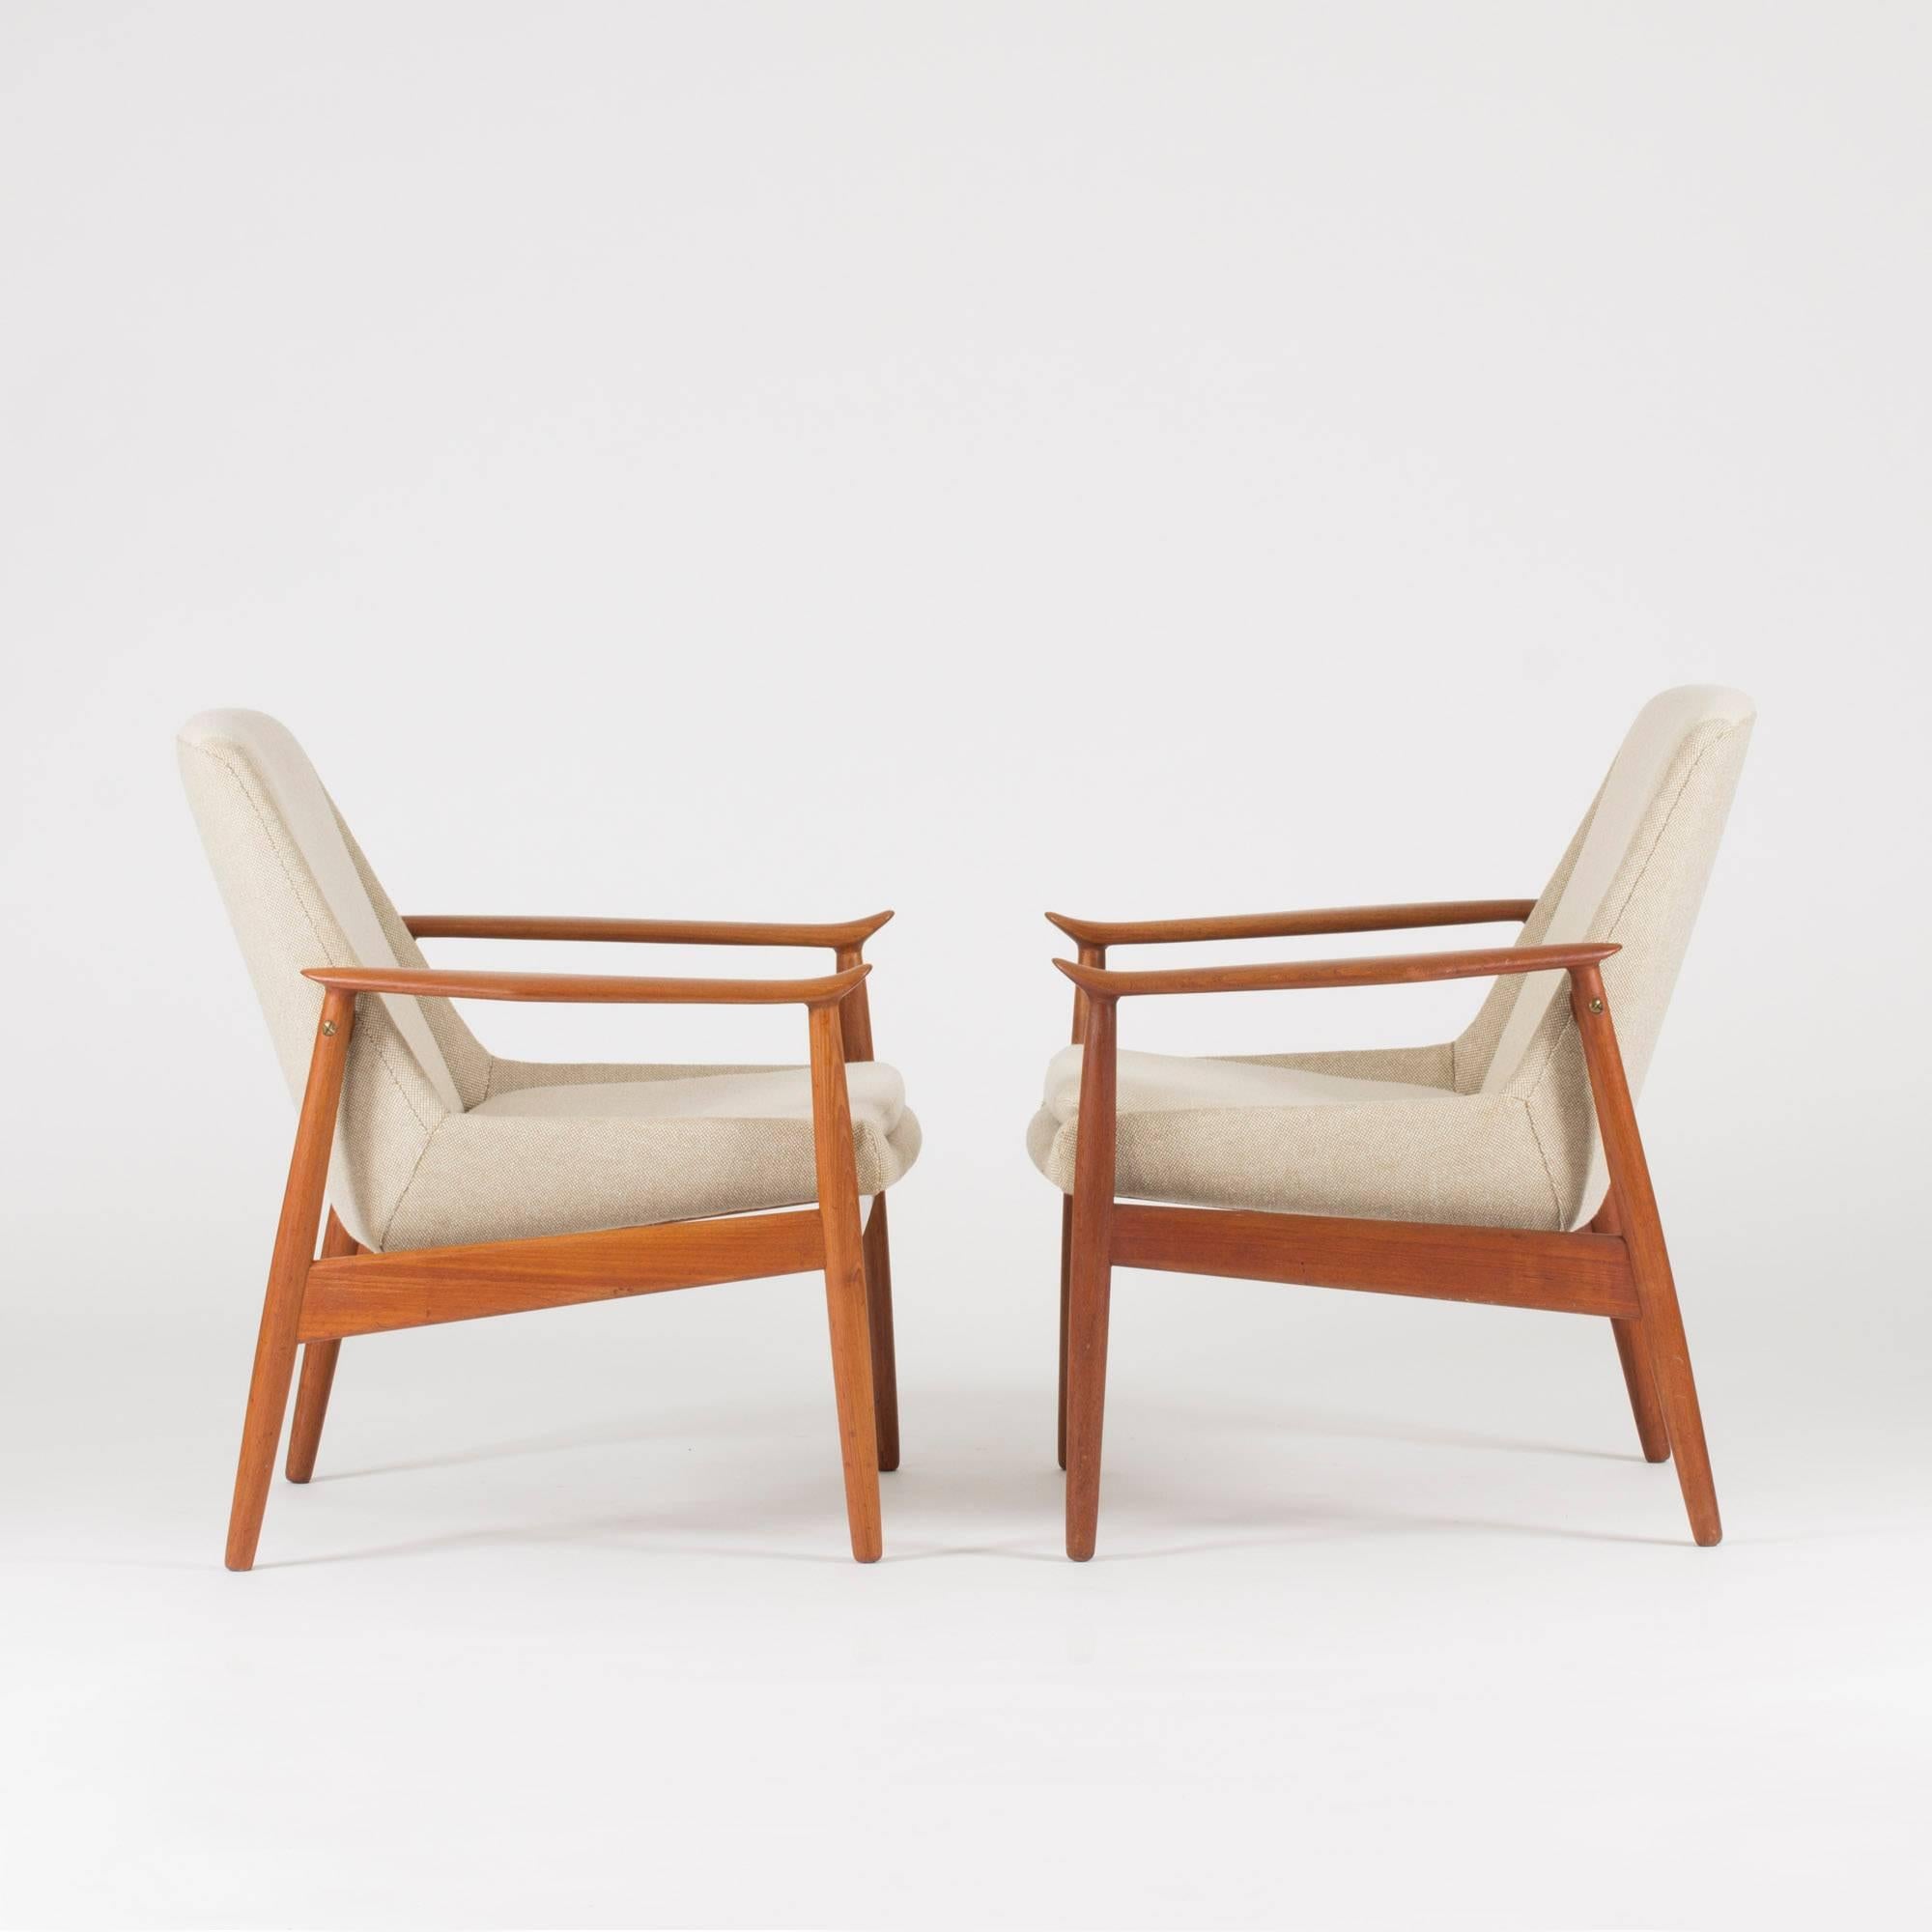 Pair of teak lounge chairs by Arne Vodder, with beautifully sculpted armrests. Upholstered with cream colored wool fabric.